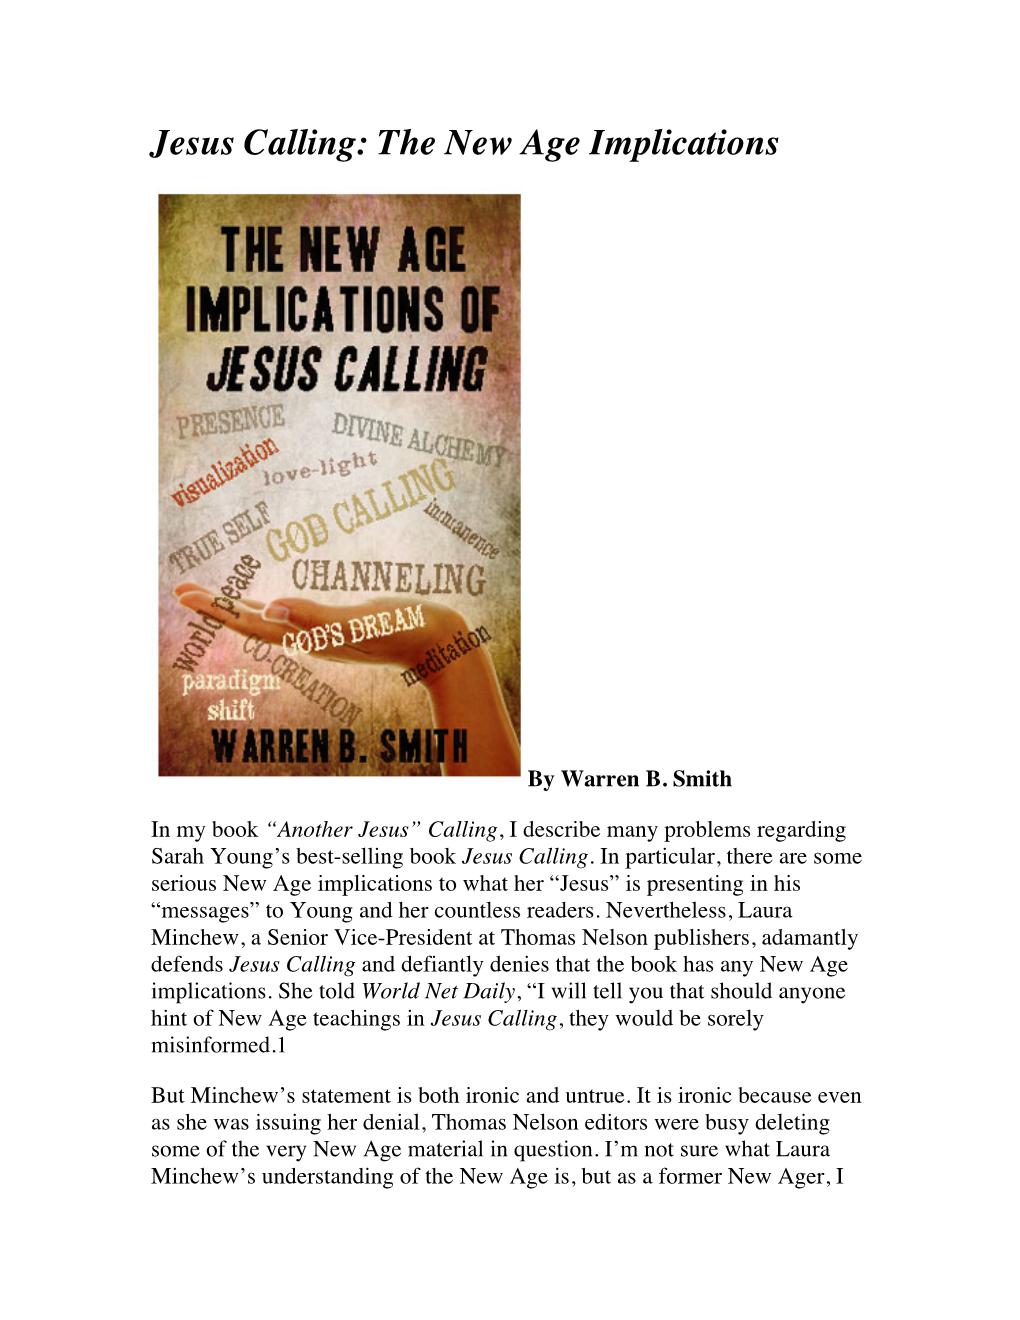 Jesus Calling: the New Age Implications